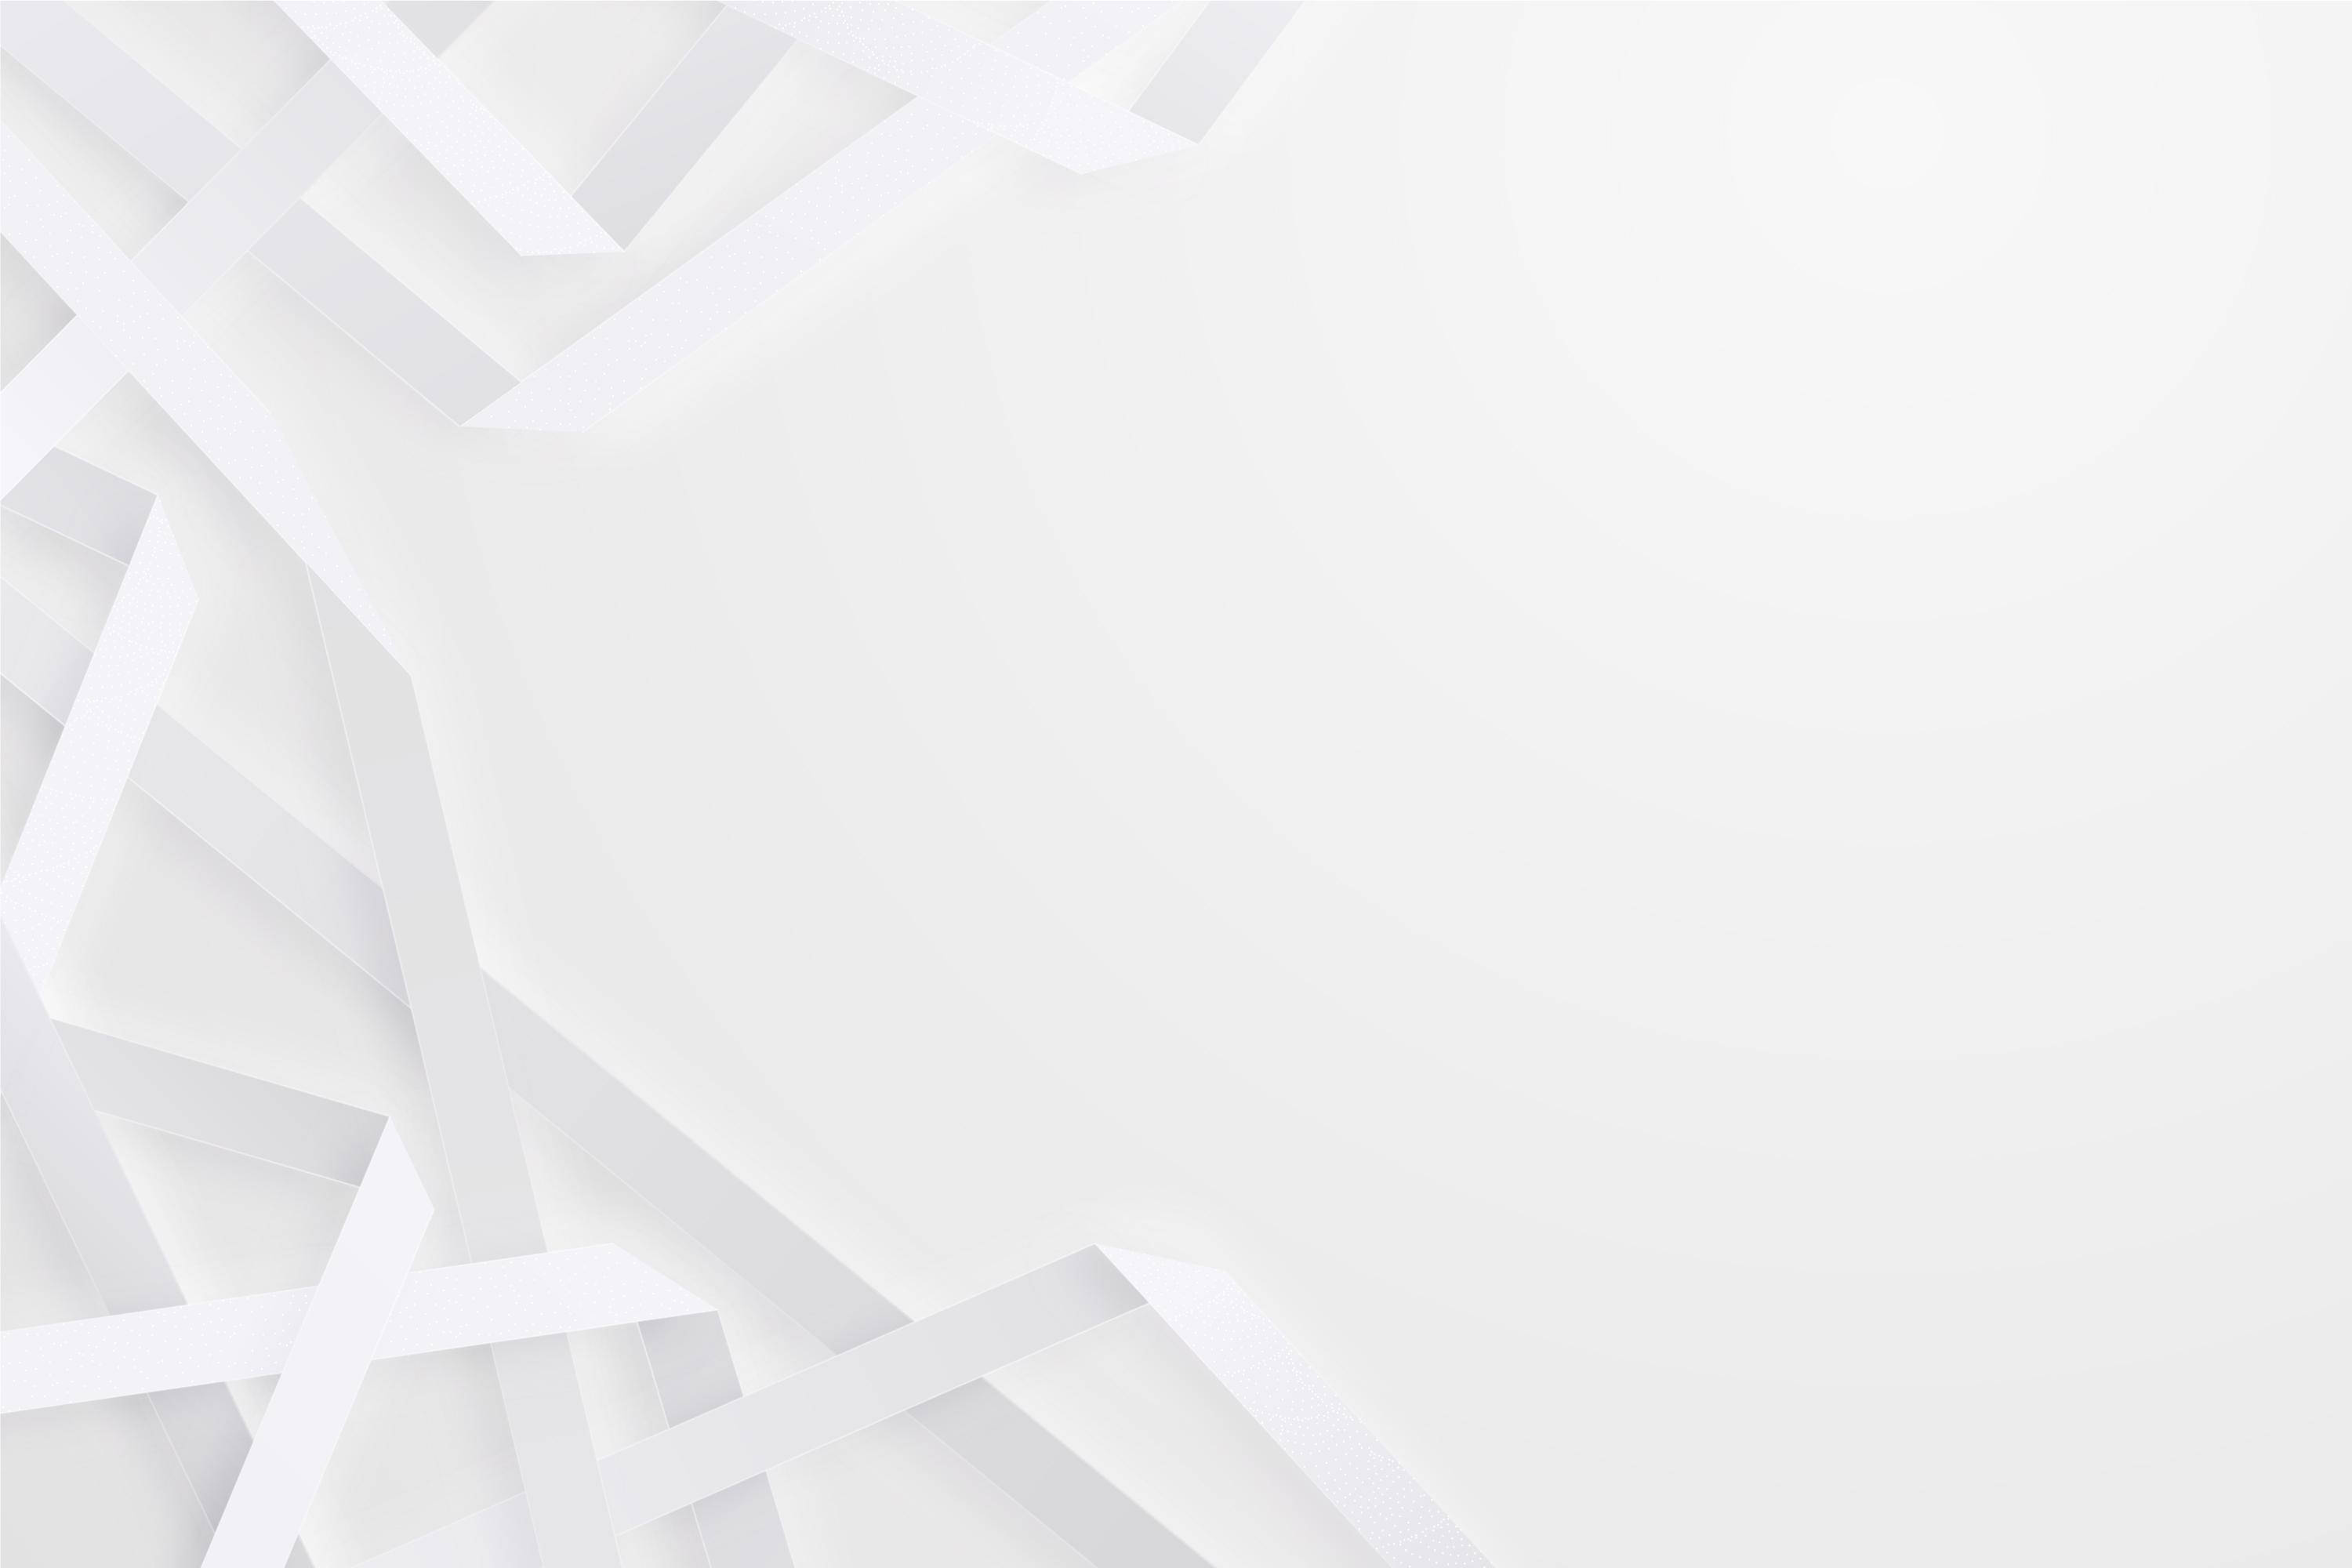 All White Folded Paper Strips Background Picture